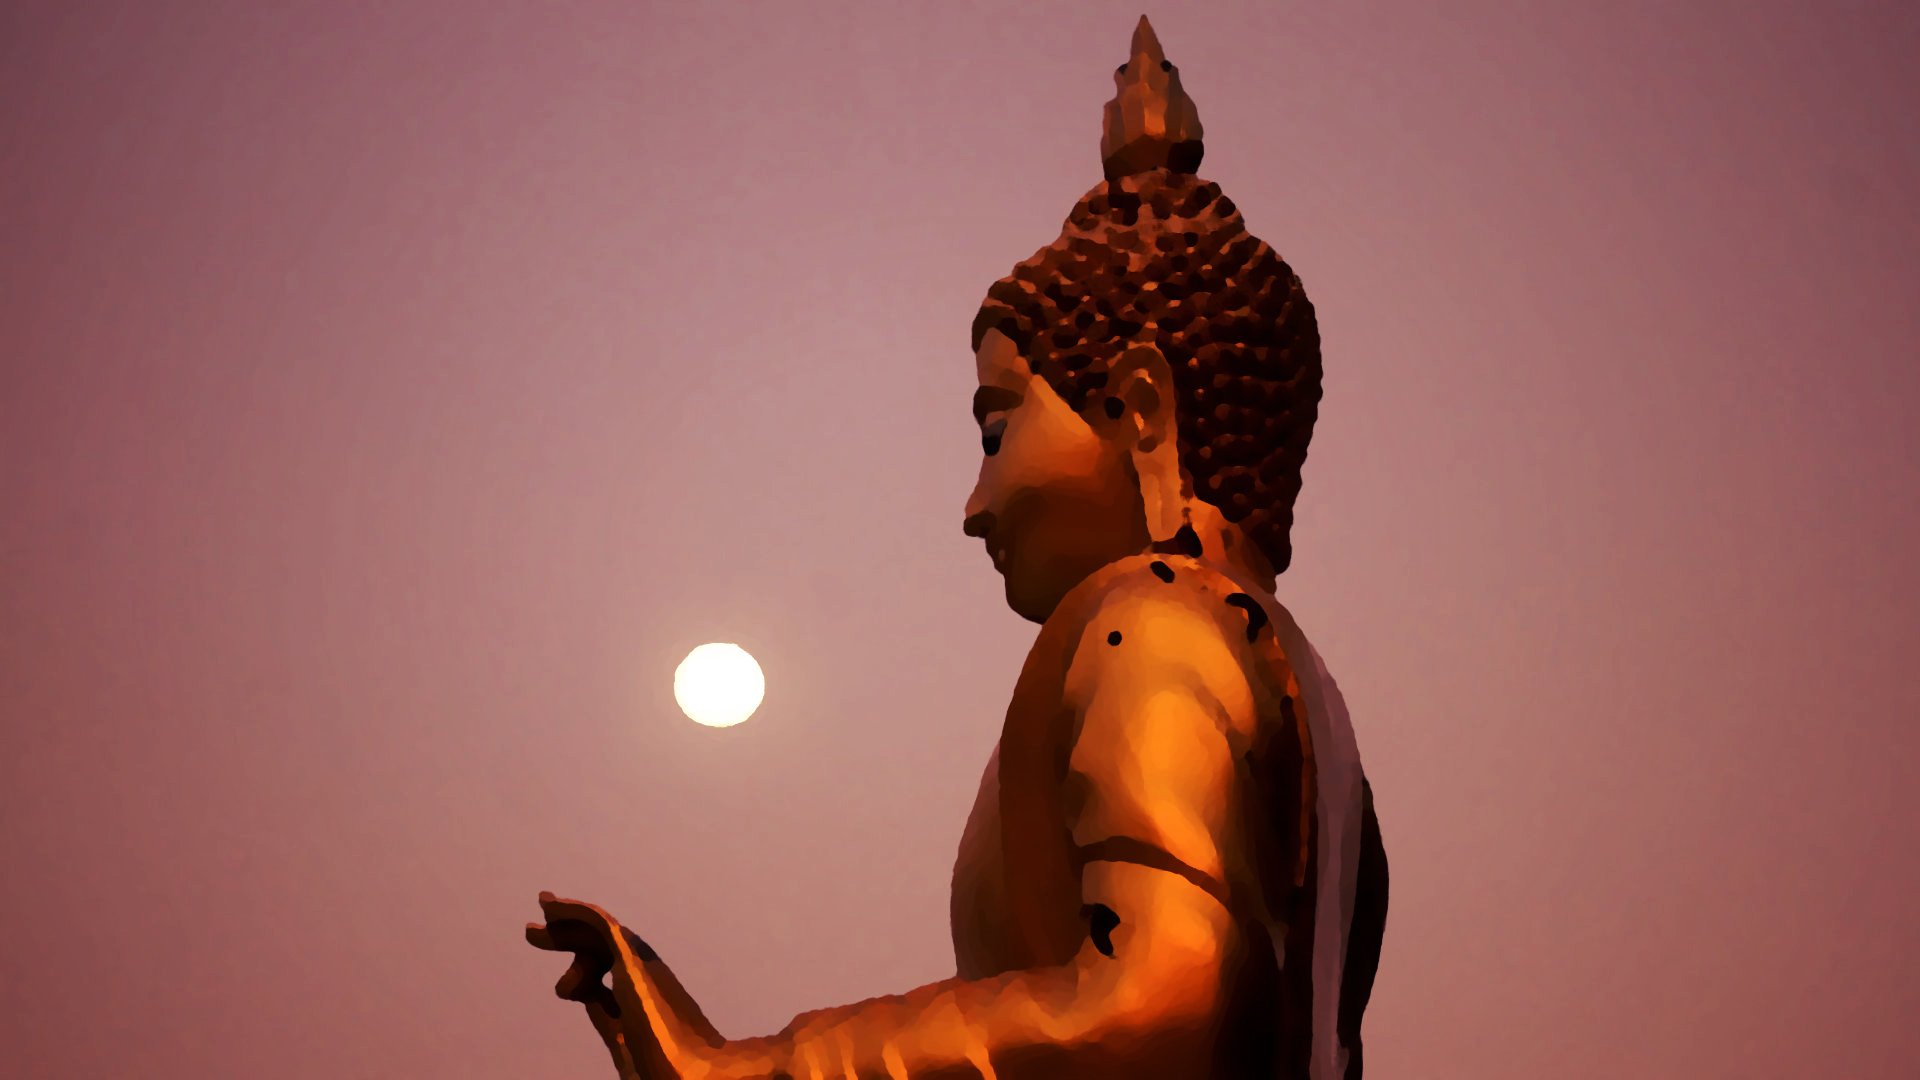 The Buddha and a full moon 1